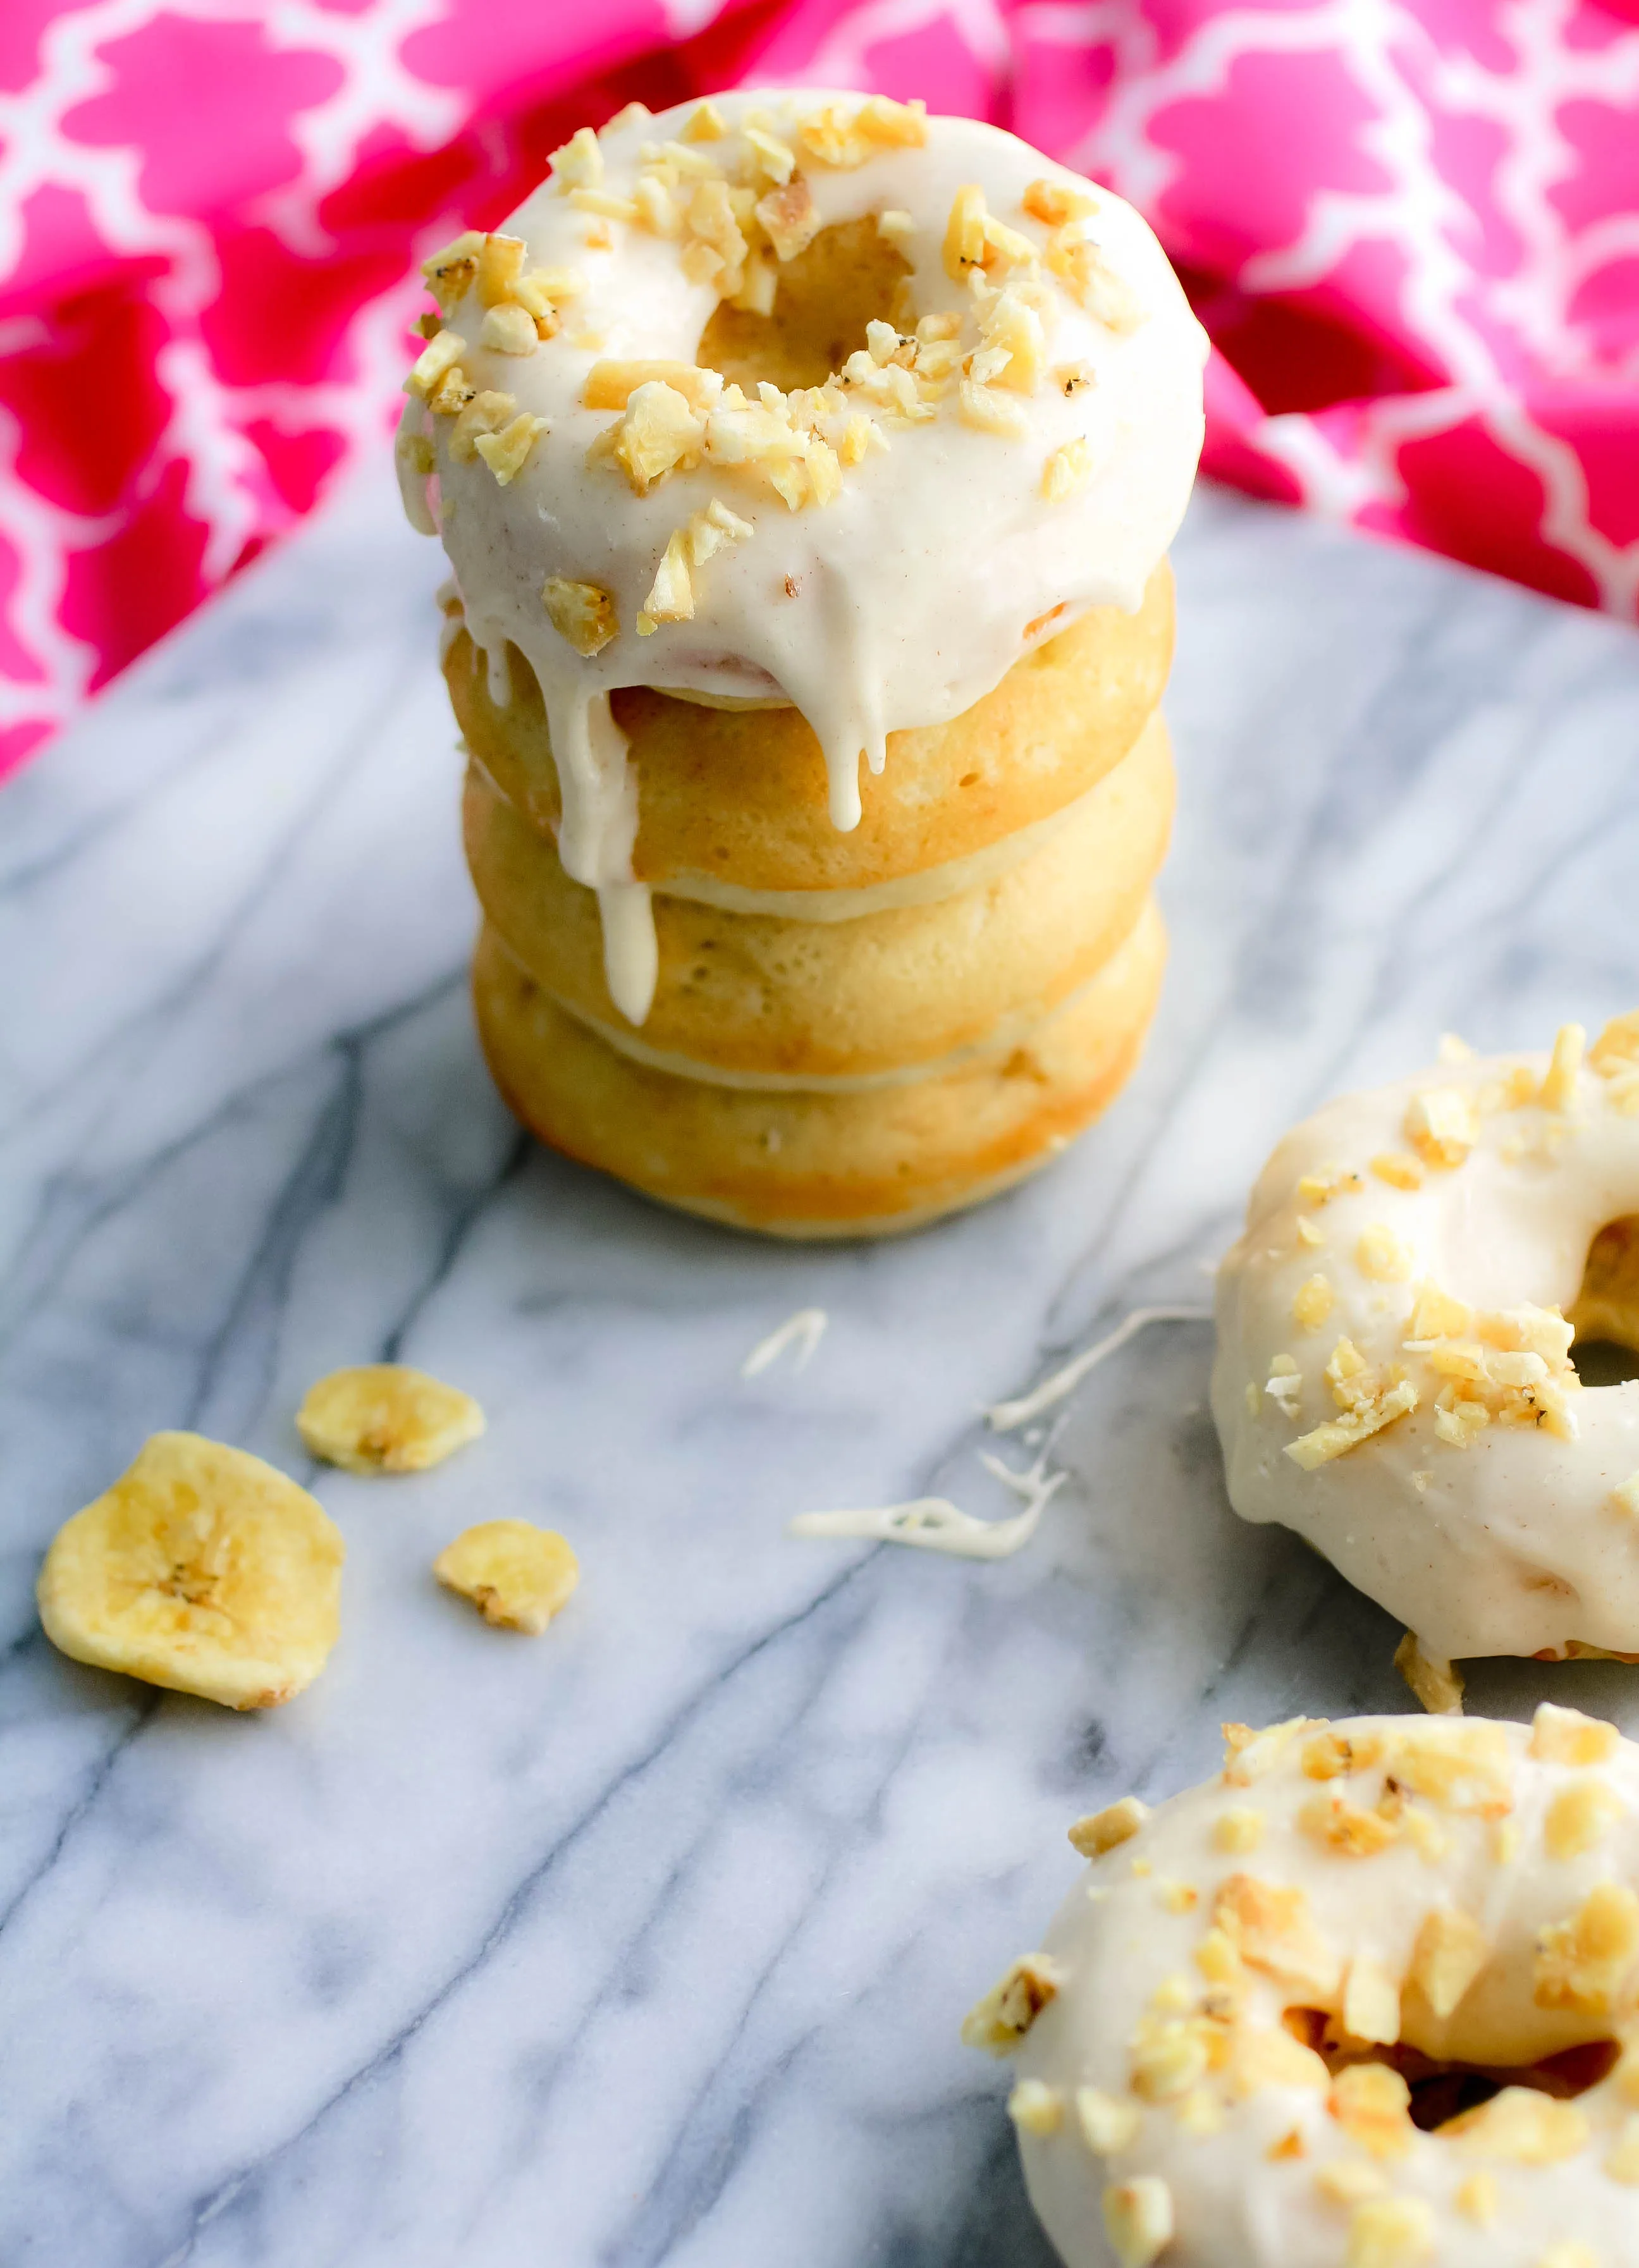 Banana Donuts with Cinnamon Cream Cheese Frosting are perfect for a sweet treat. Banana Donuts with Cinnamon Cream Cheese Frosting will bring a smile to your face -- they're so tasty!